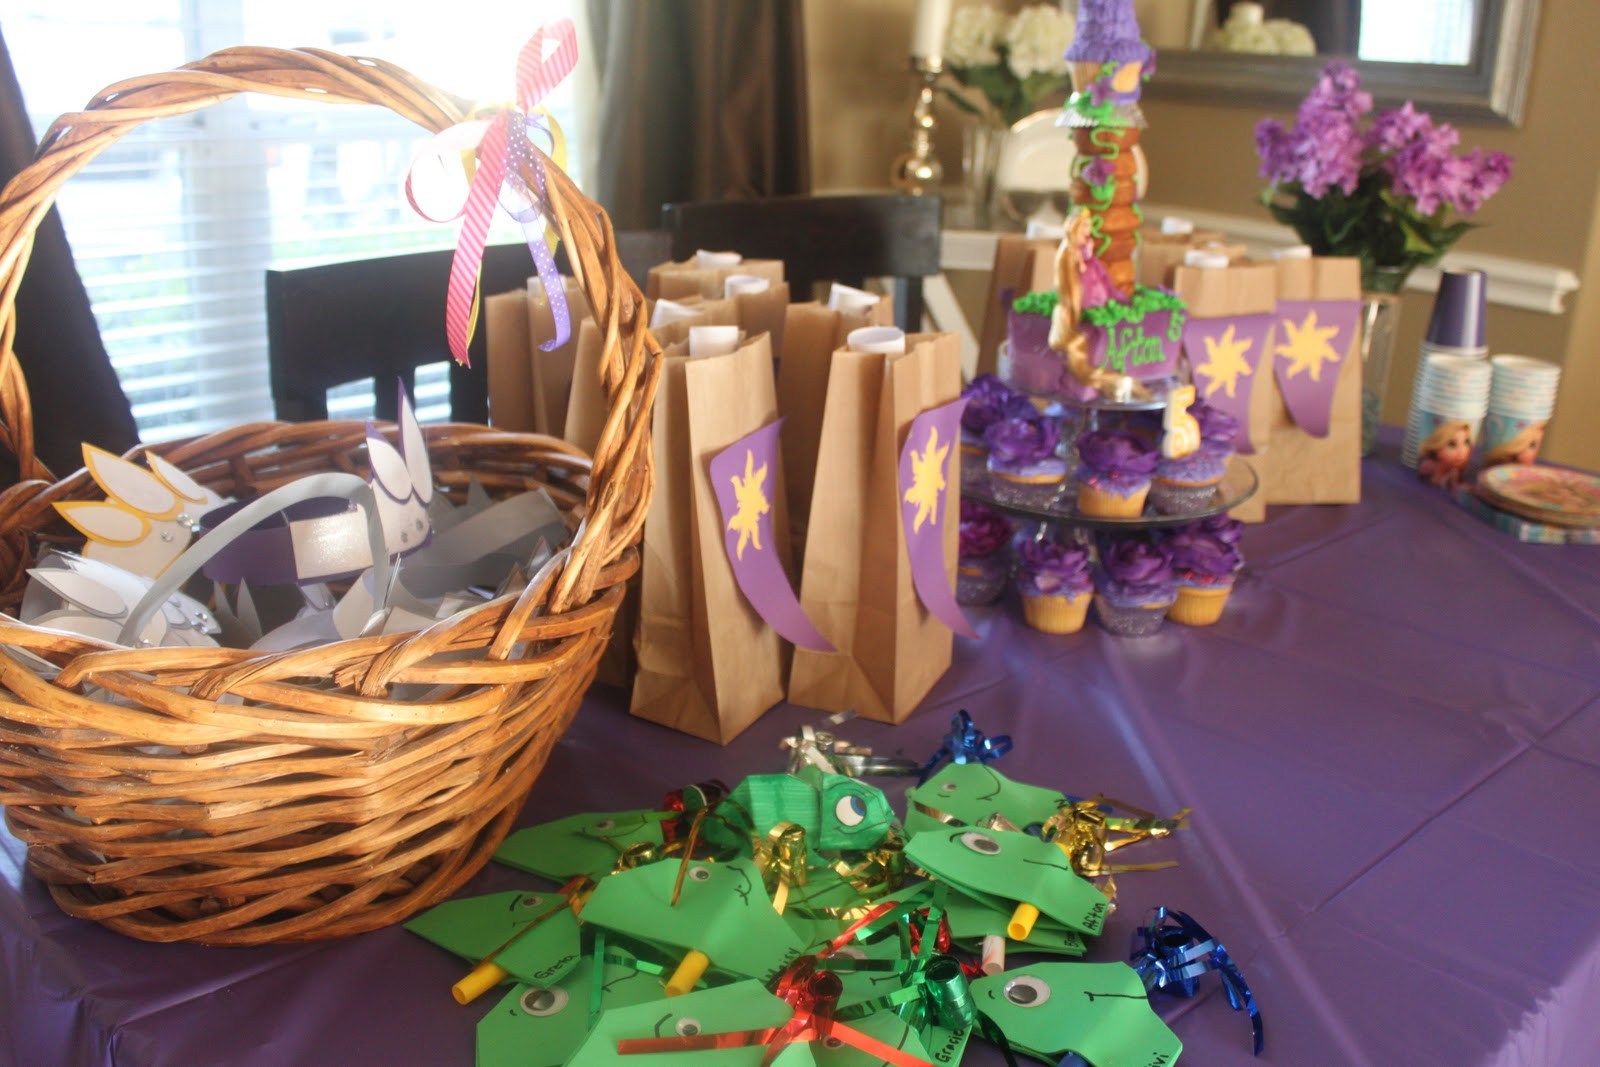 Tangled Birthday Party Supplies
 Crafty Texas Girls Crafty How To "Tangled" Rapunzel